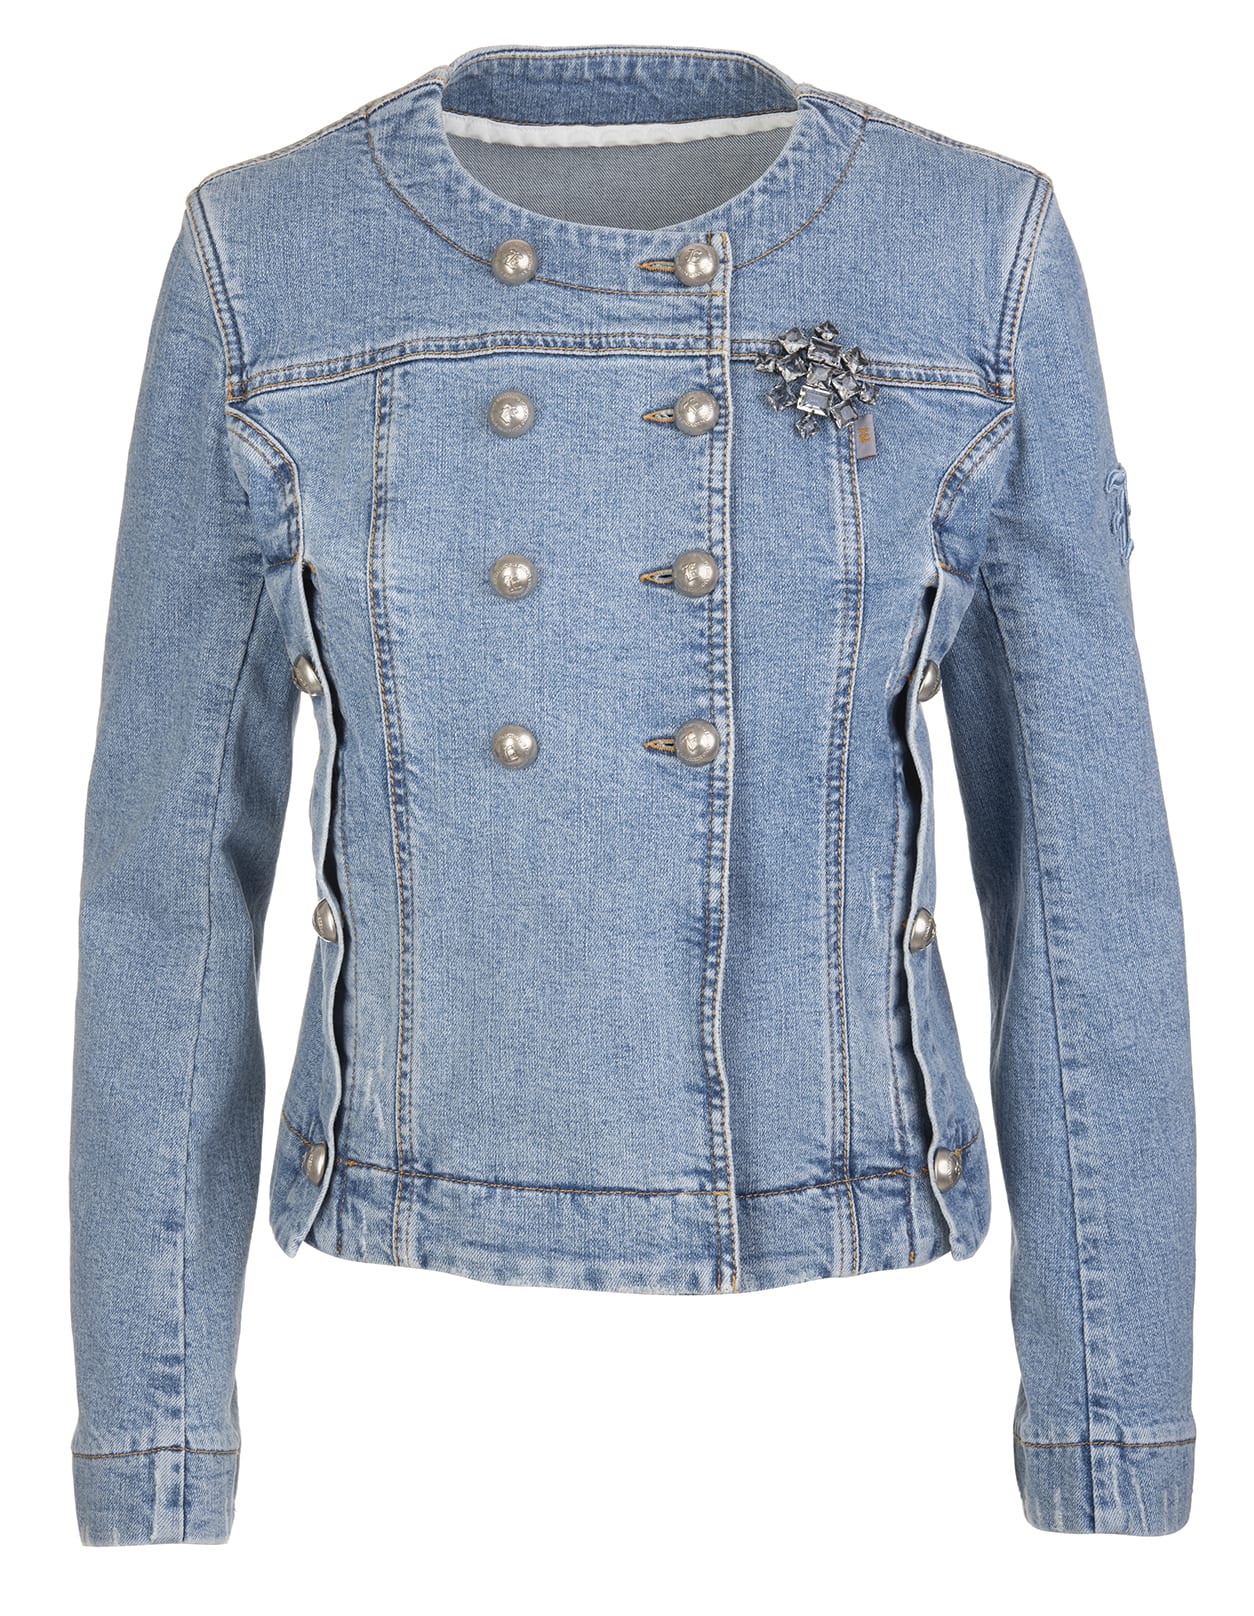 Ermanno Scervino Double-breasted Jacket In Light Blue Denim With Bijoux Brooch